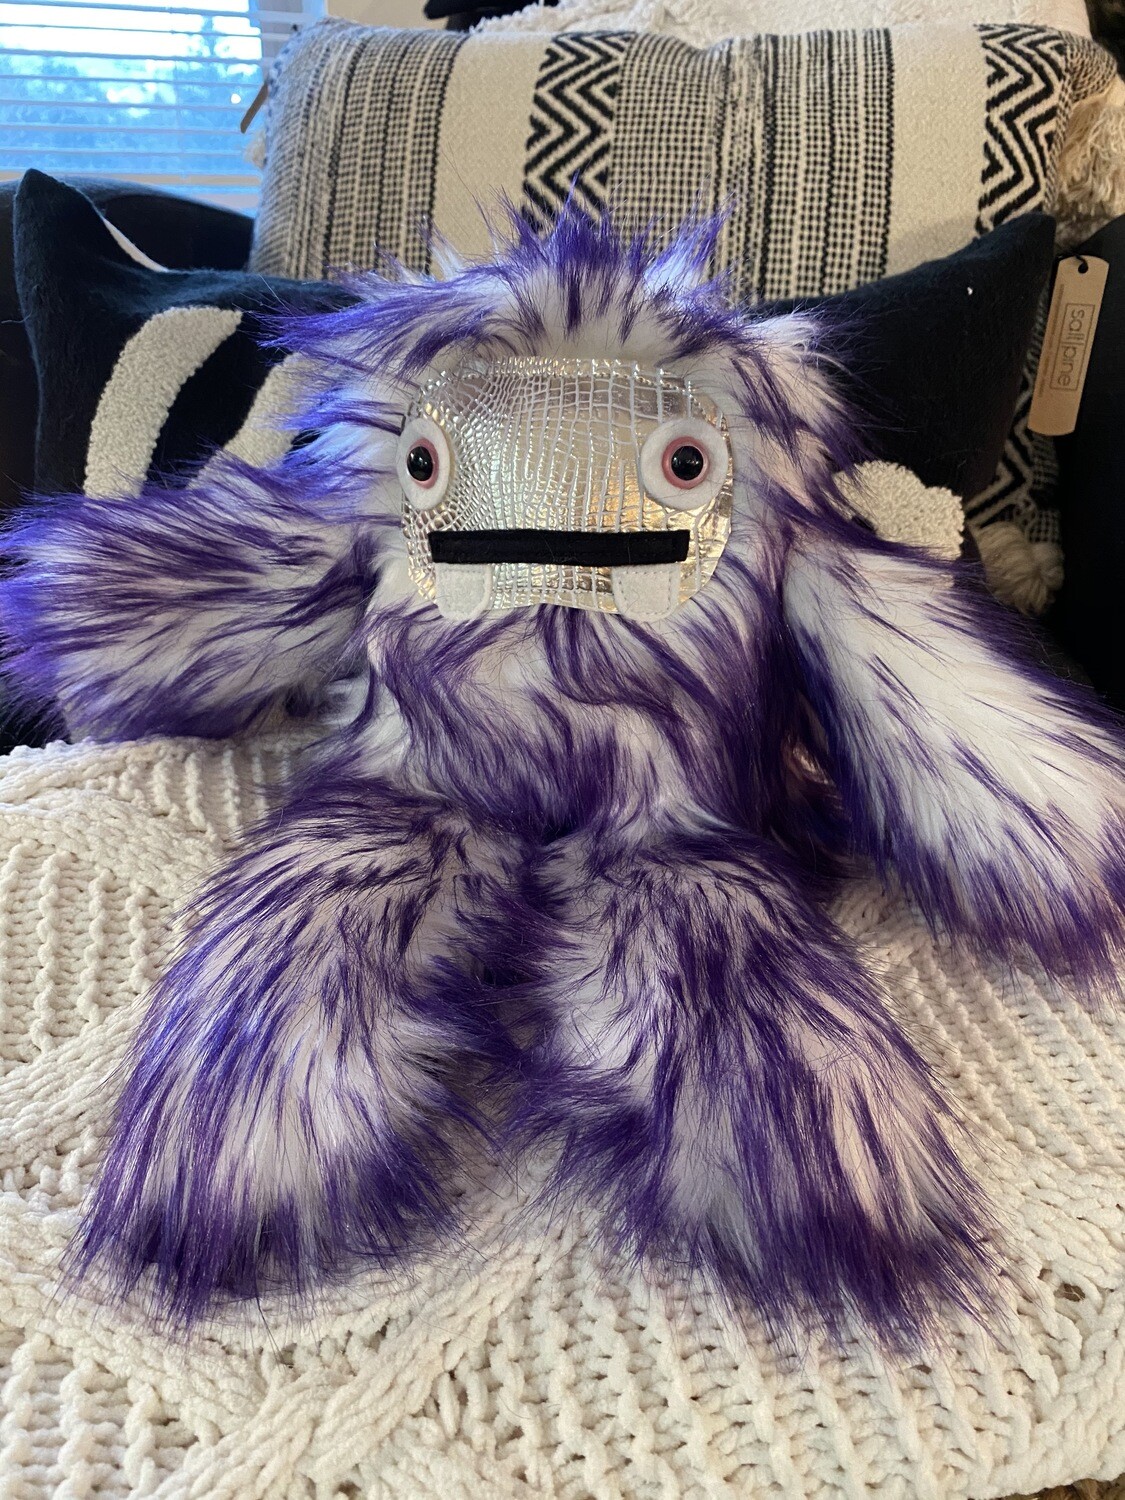 Crystal Infused Protective Snuggle Monster - Purple and White/silver ...